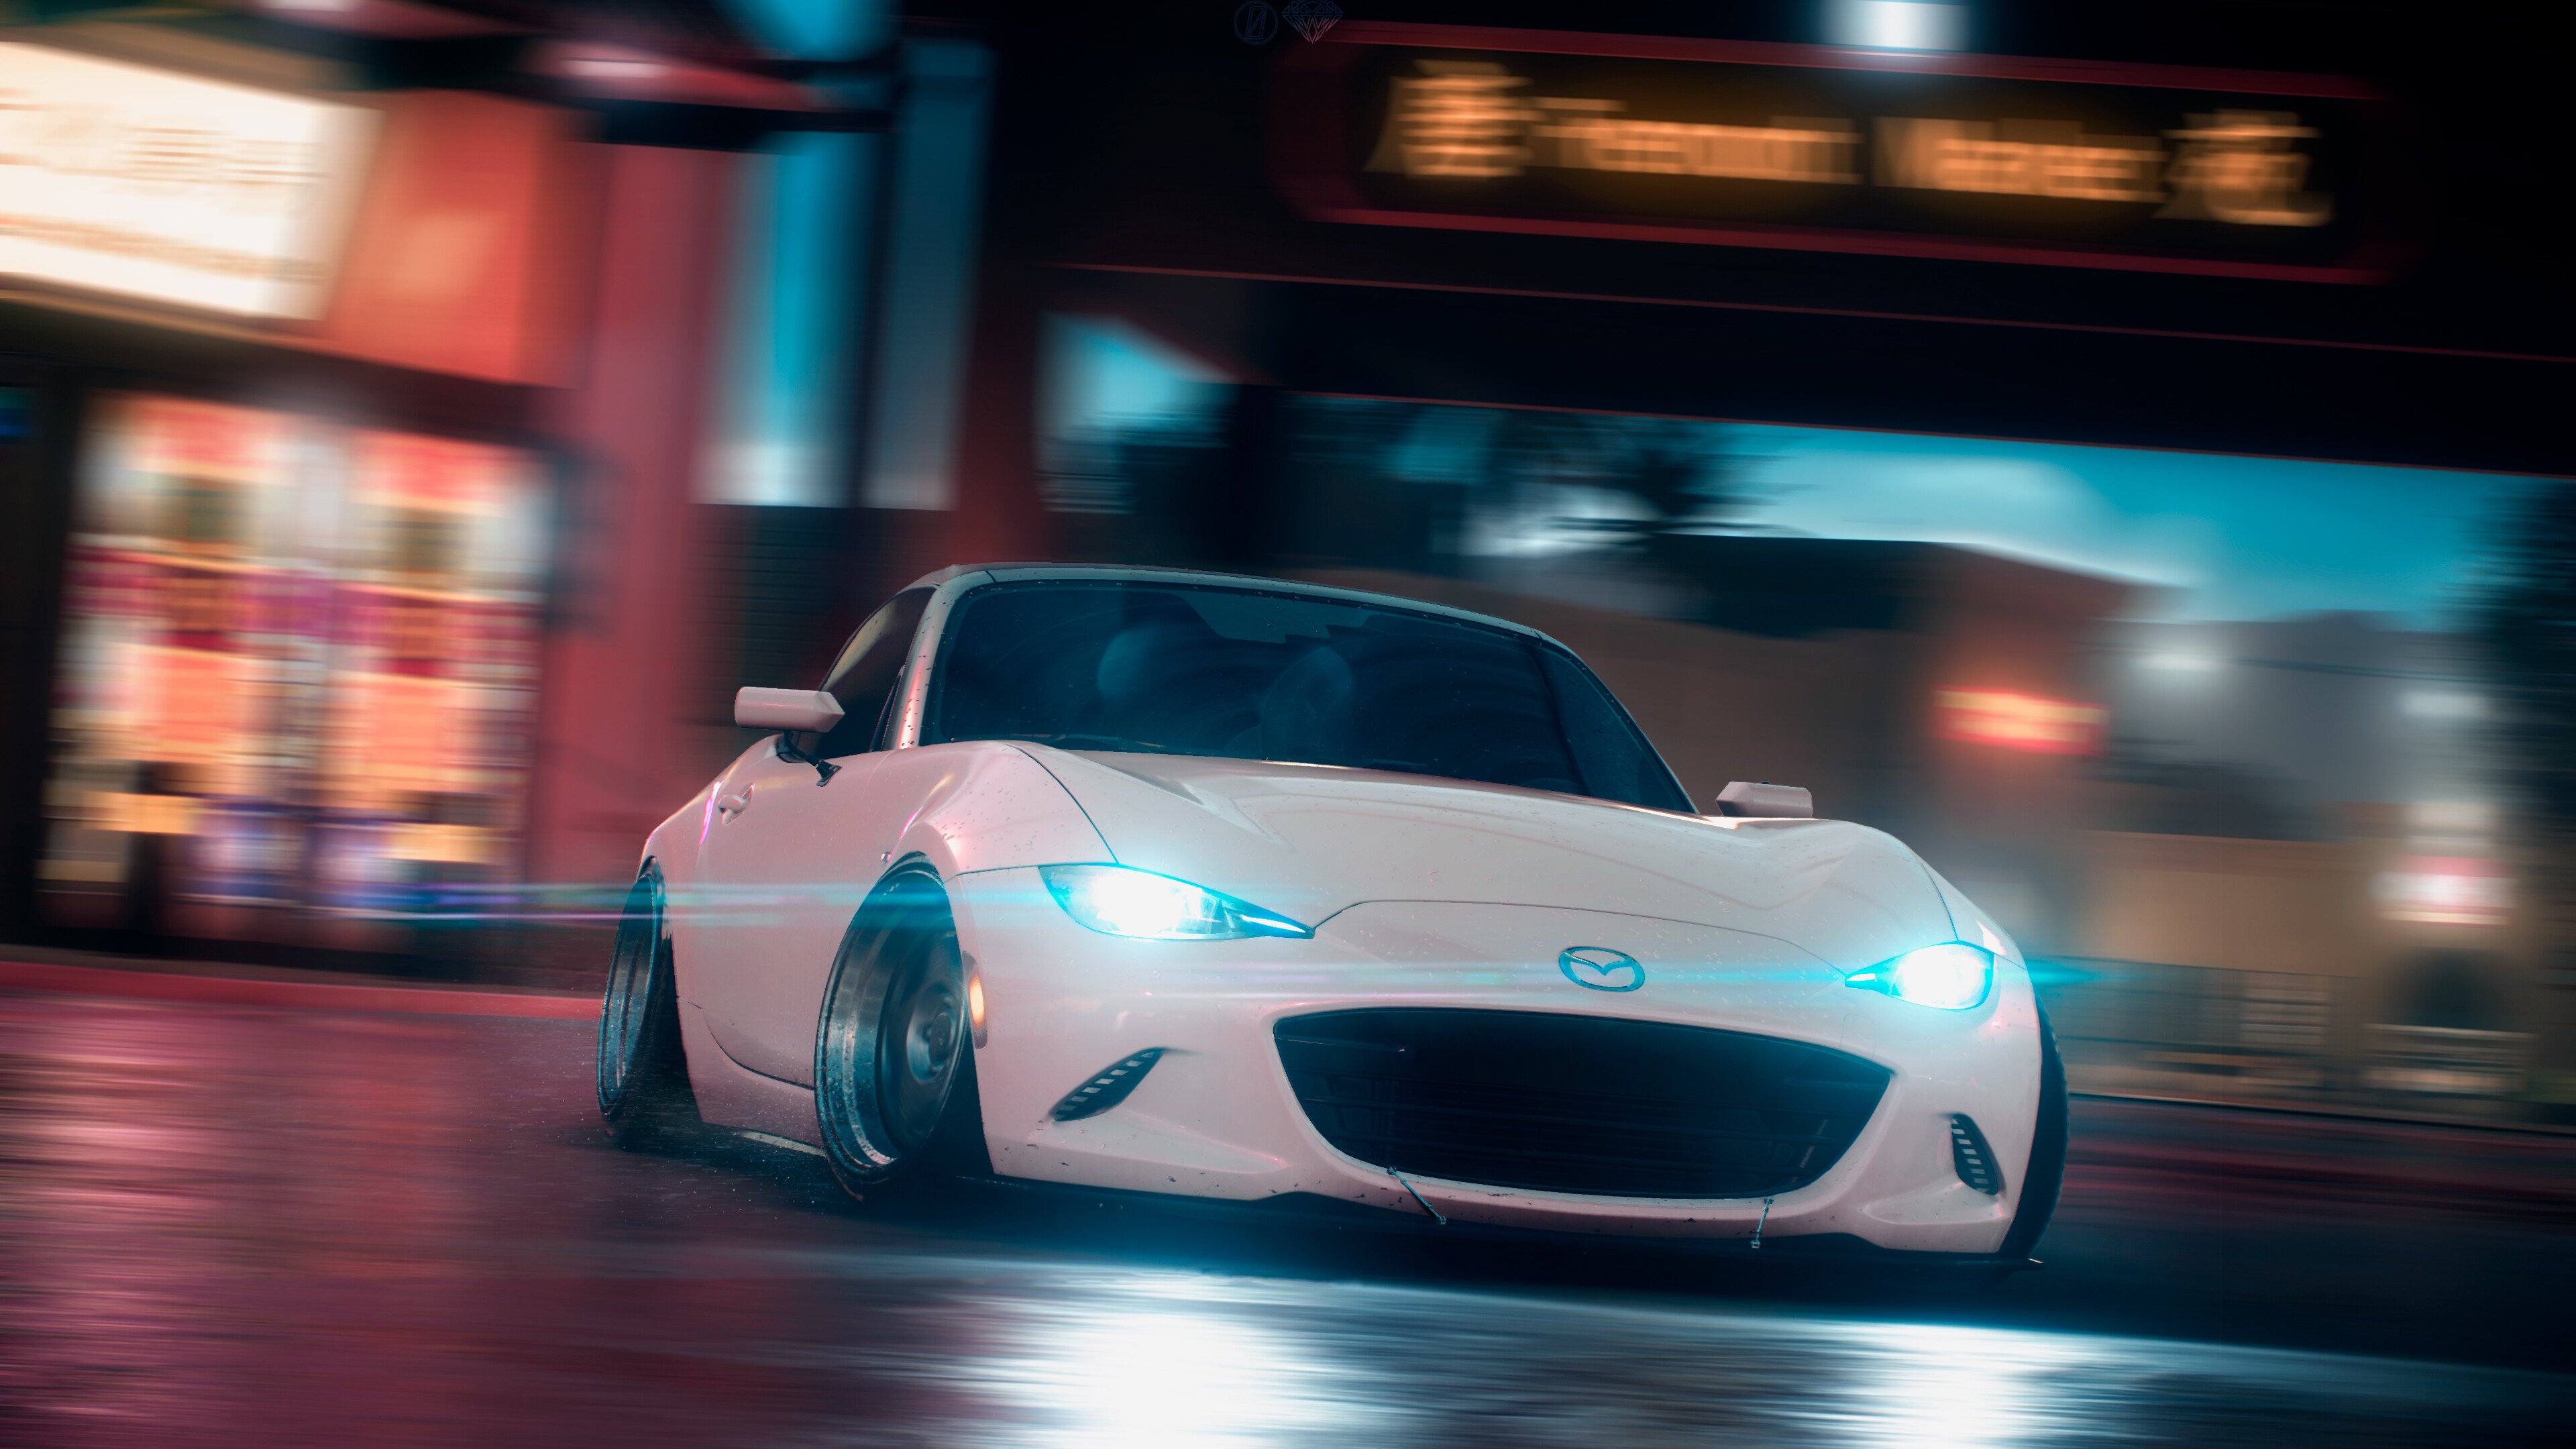 Mazda MX-5 Miata: Need For Speed, Games, The model debuted in 1989 at the Chicago Auto Show. 3840x2160 4K Background.